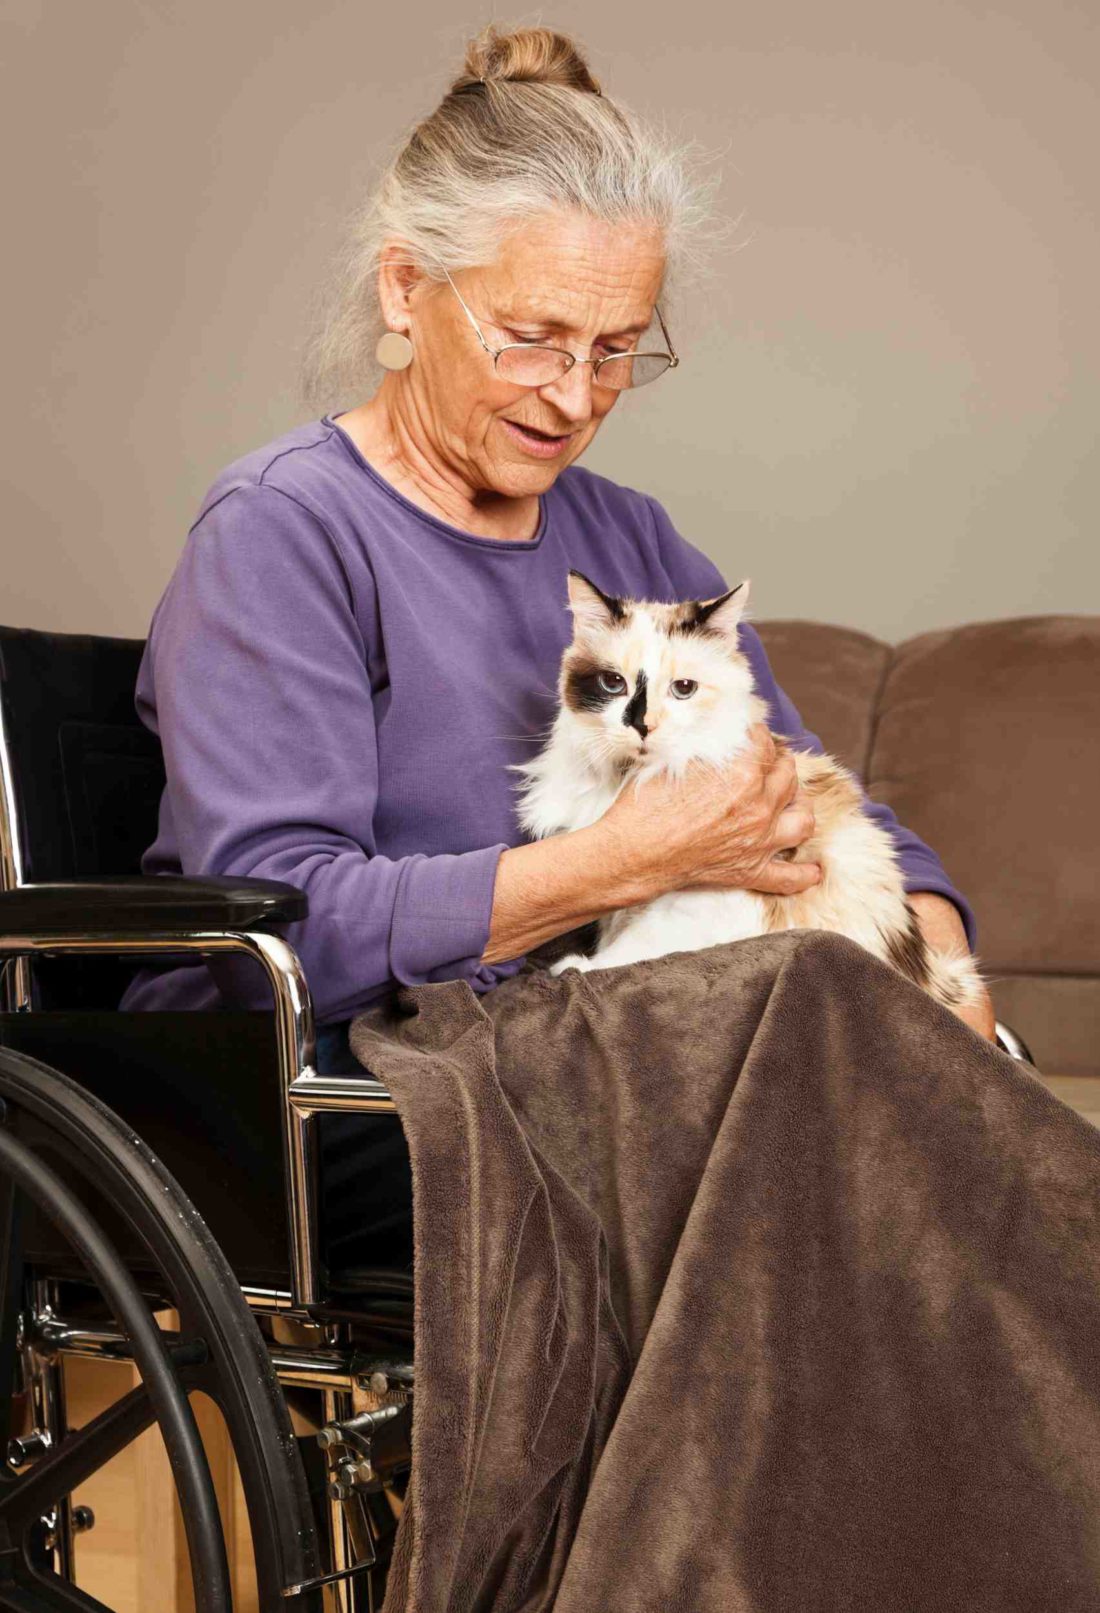 Questions To Ask Yourself Before Moving A Loved One Into A Care Home